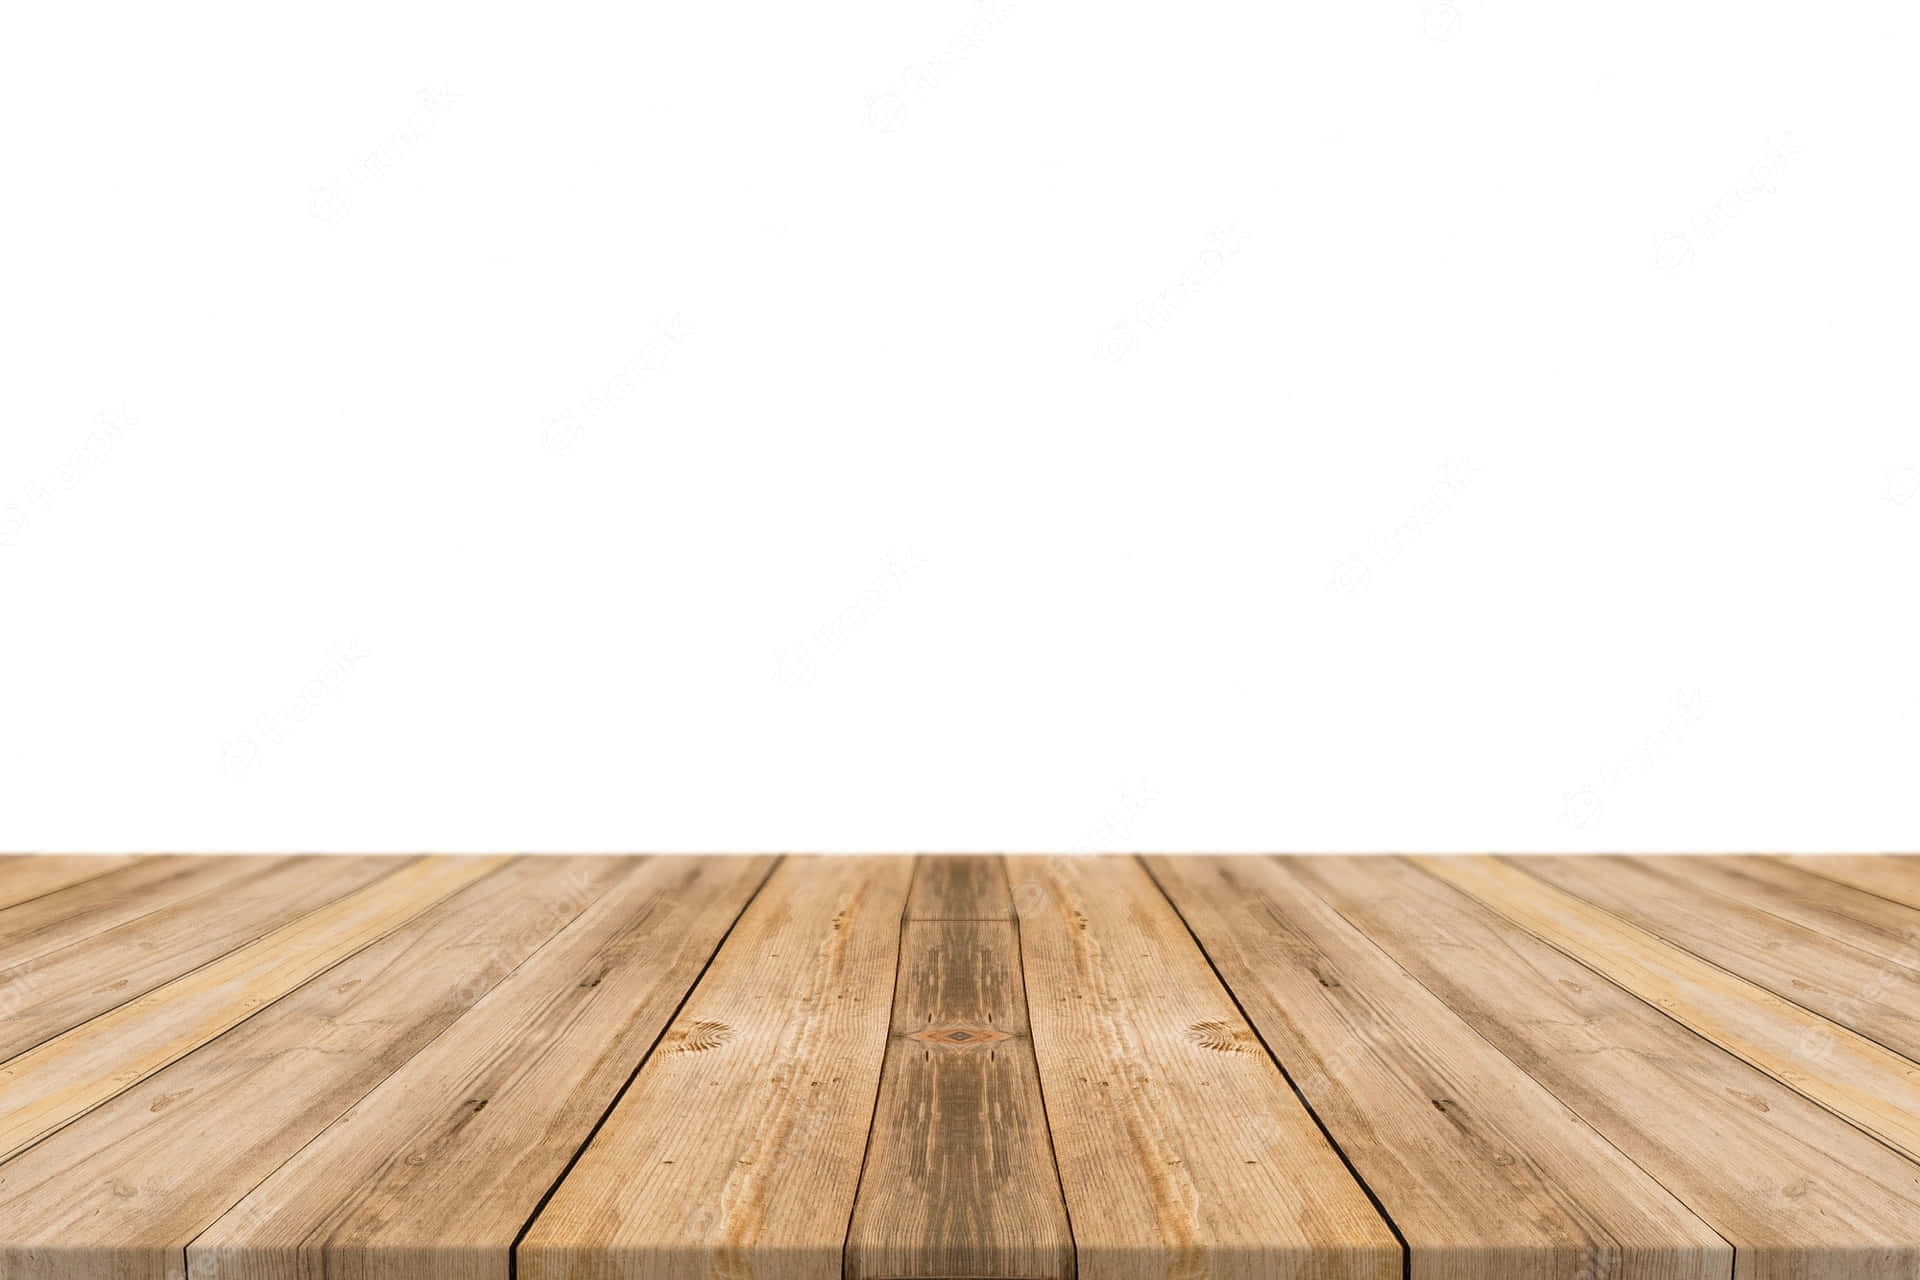 "durable Rustic Wooden Table Background"